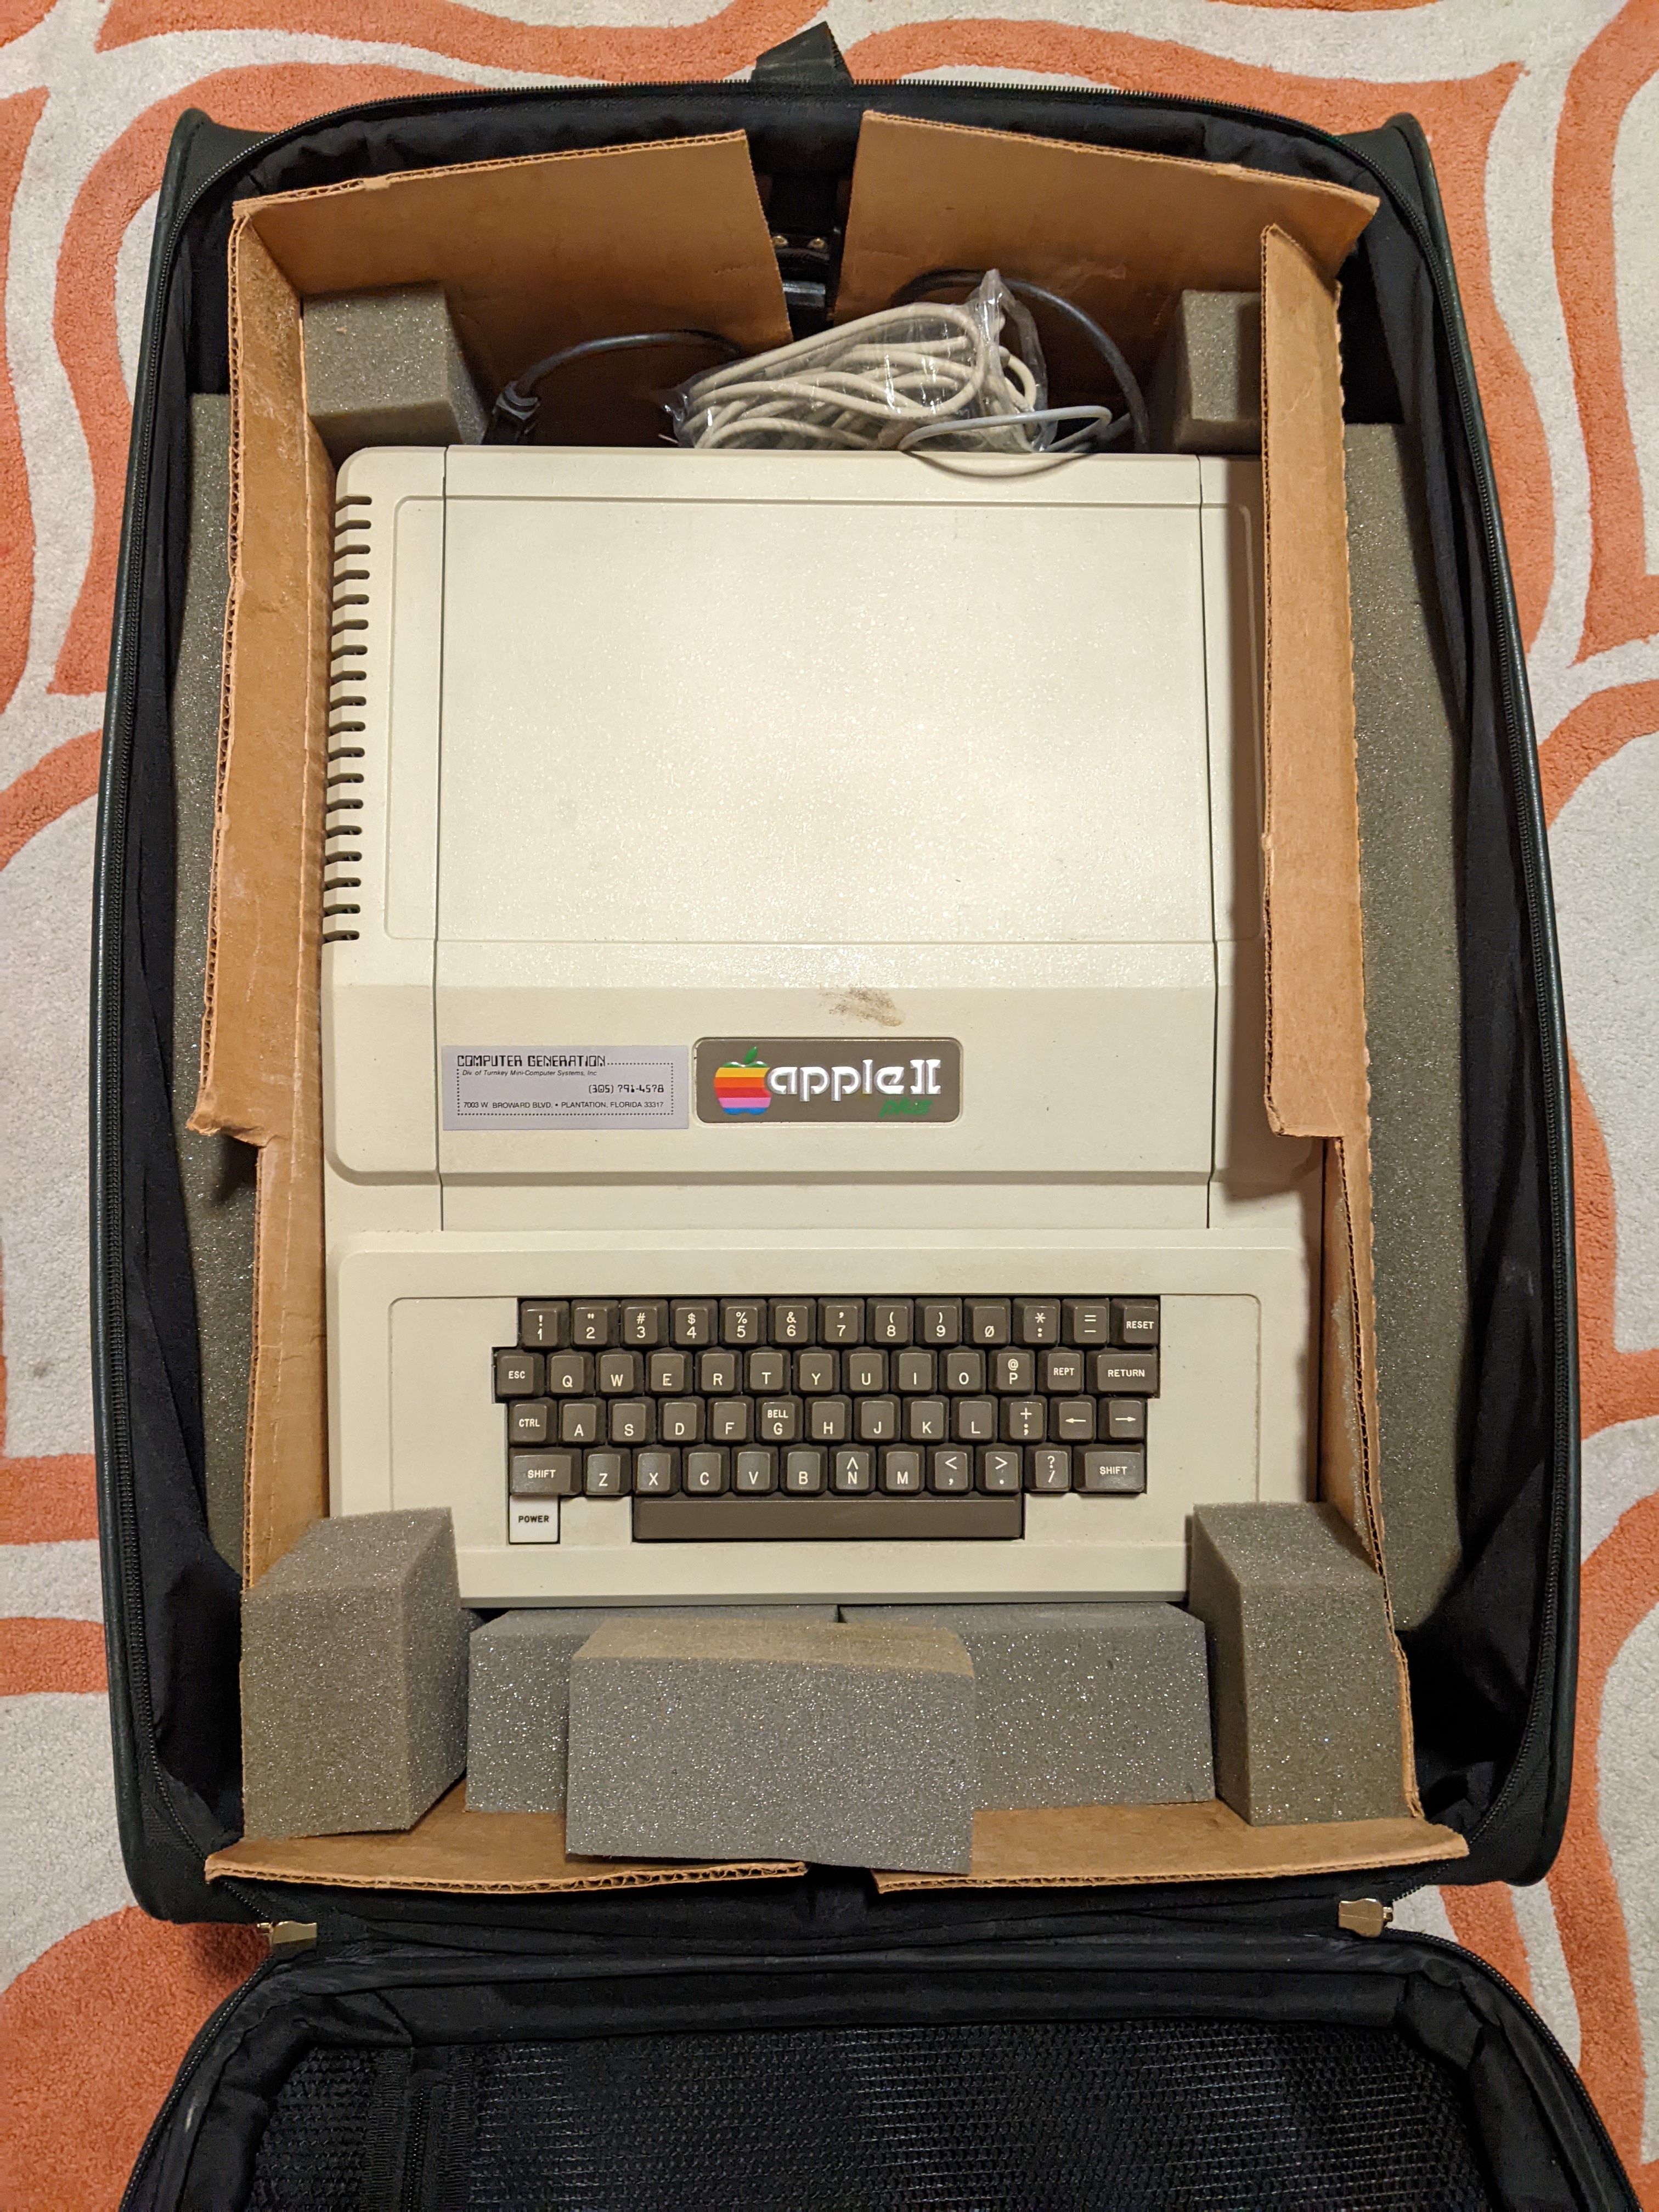 Apple ][+ computer in the suitcase